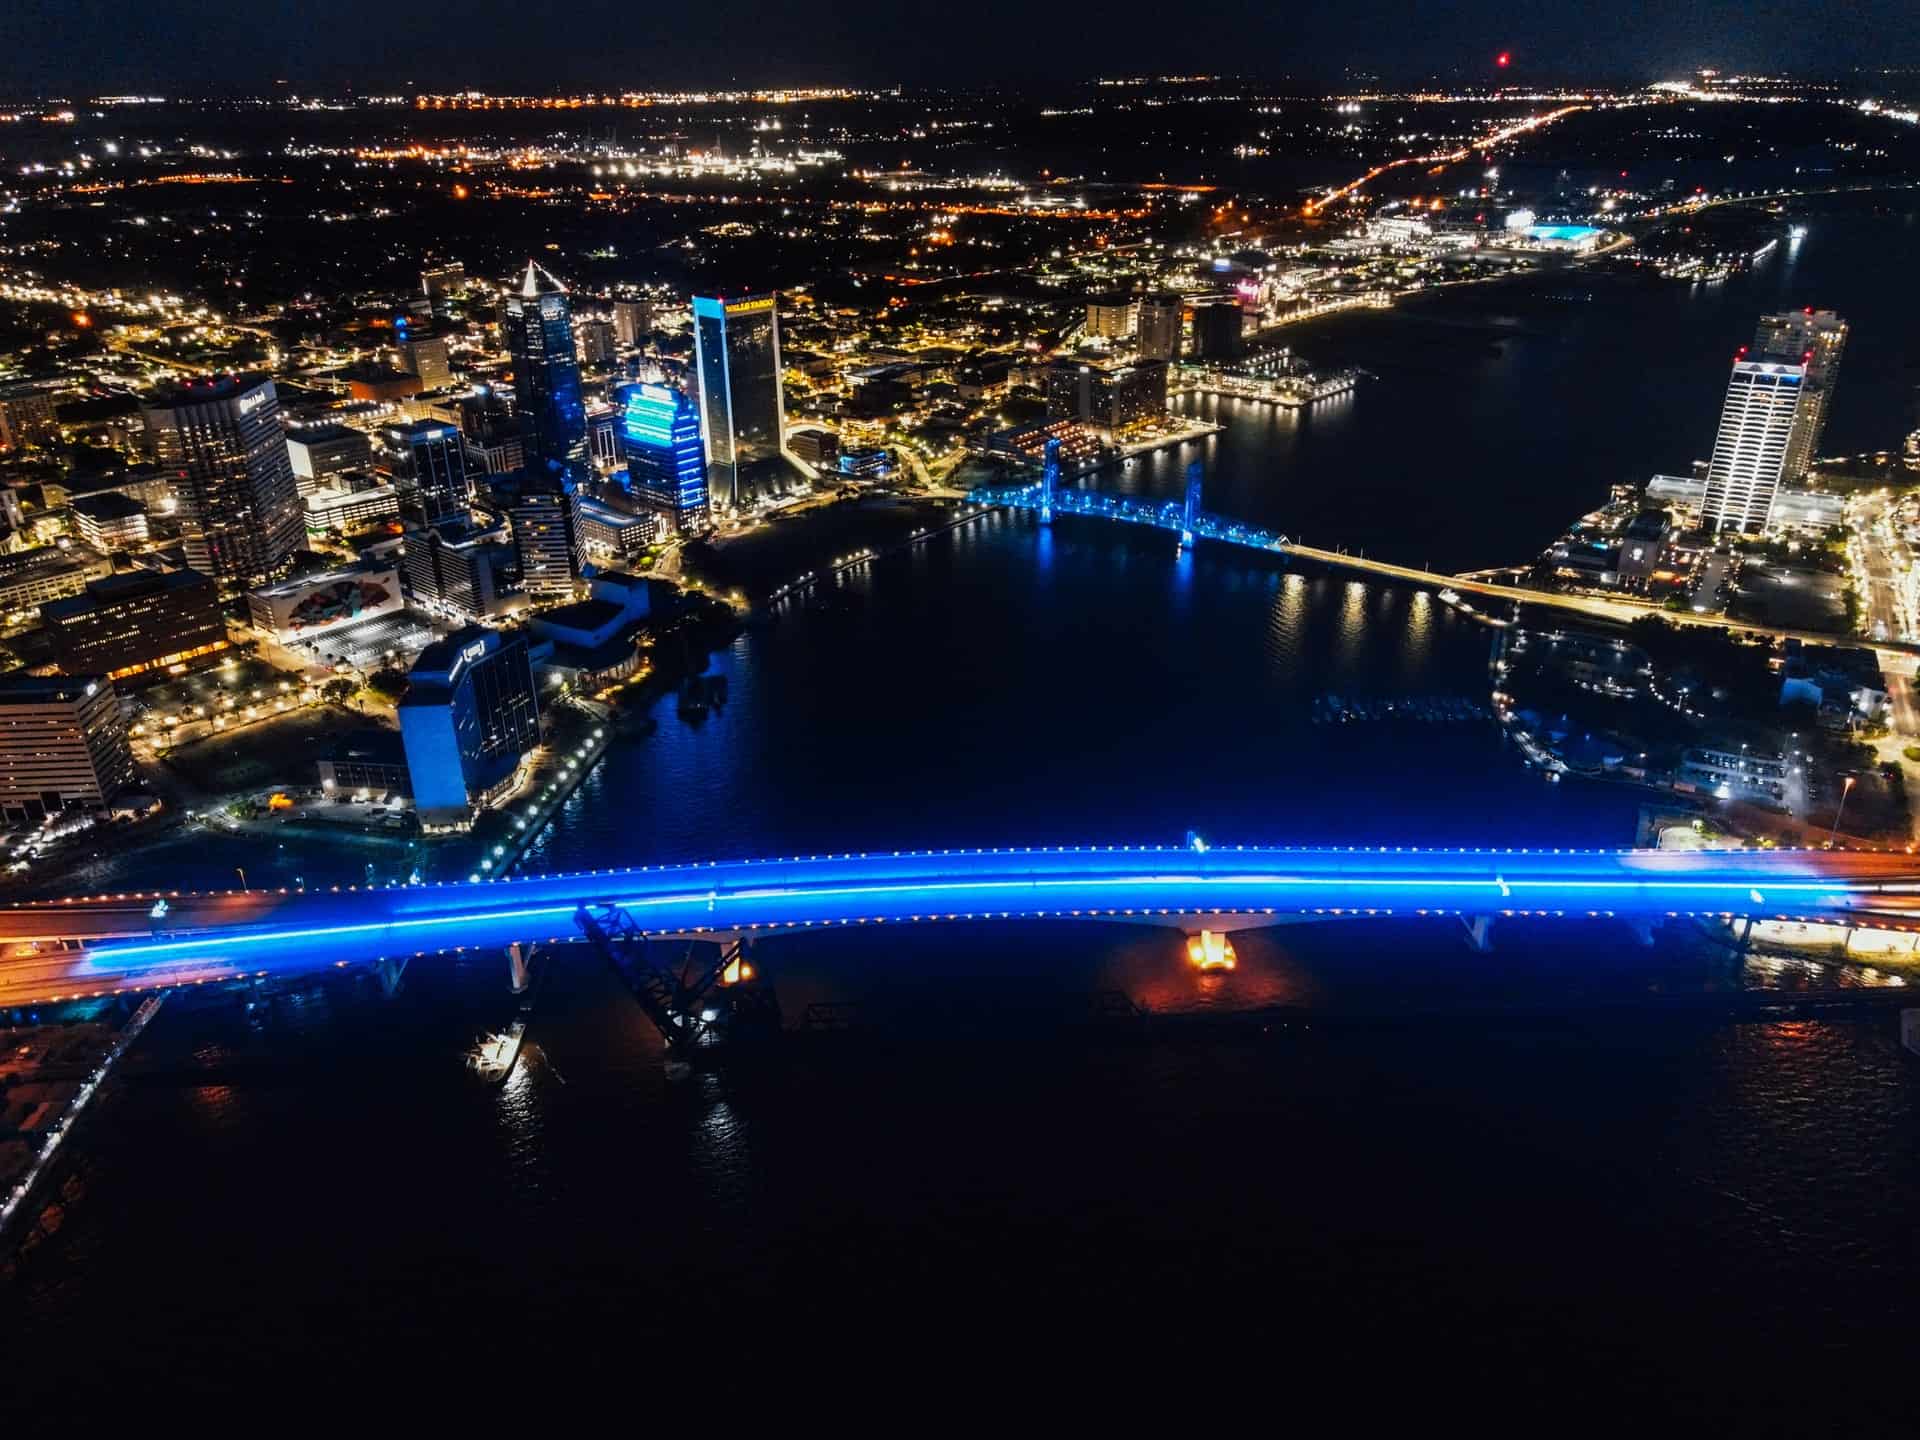 Best things to do in Jacksonville Florida - Ruby Escalona - Jacksonville Downtown at night by Trevor Neely on Unsplash